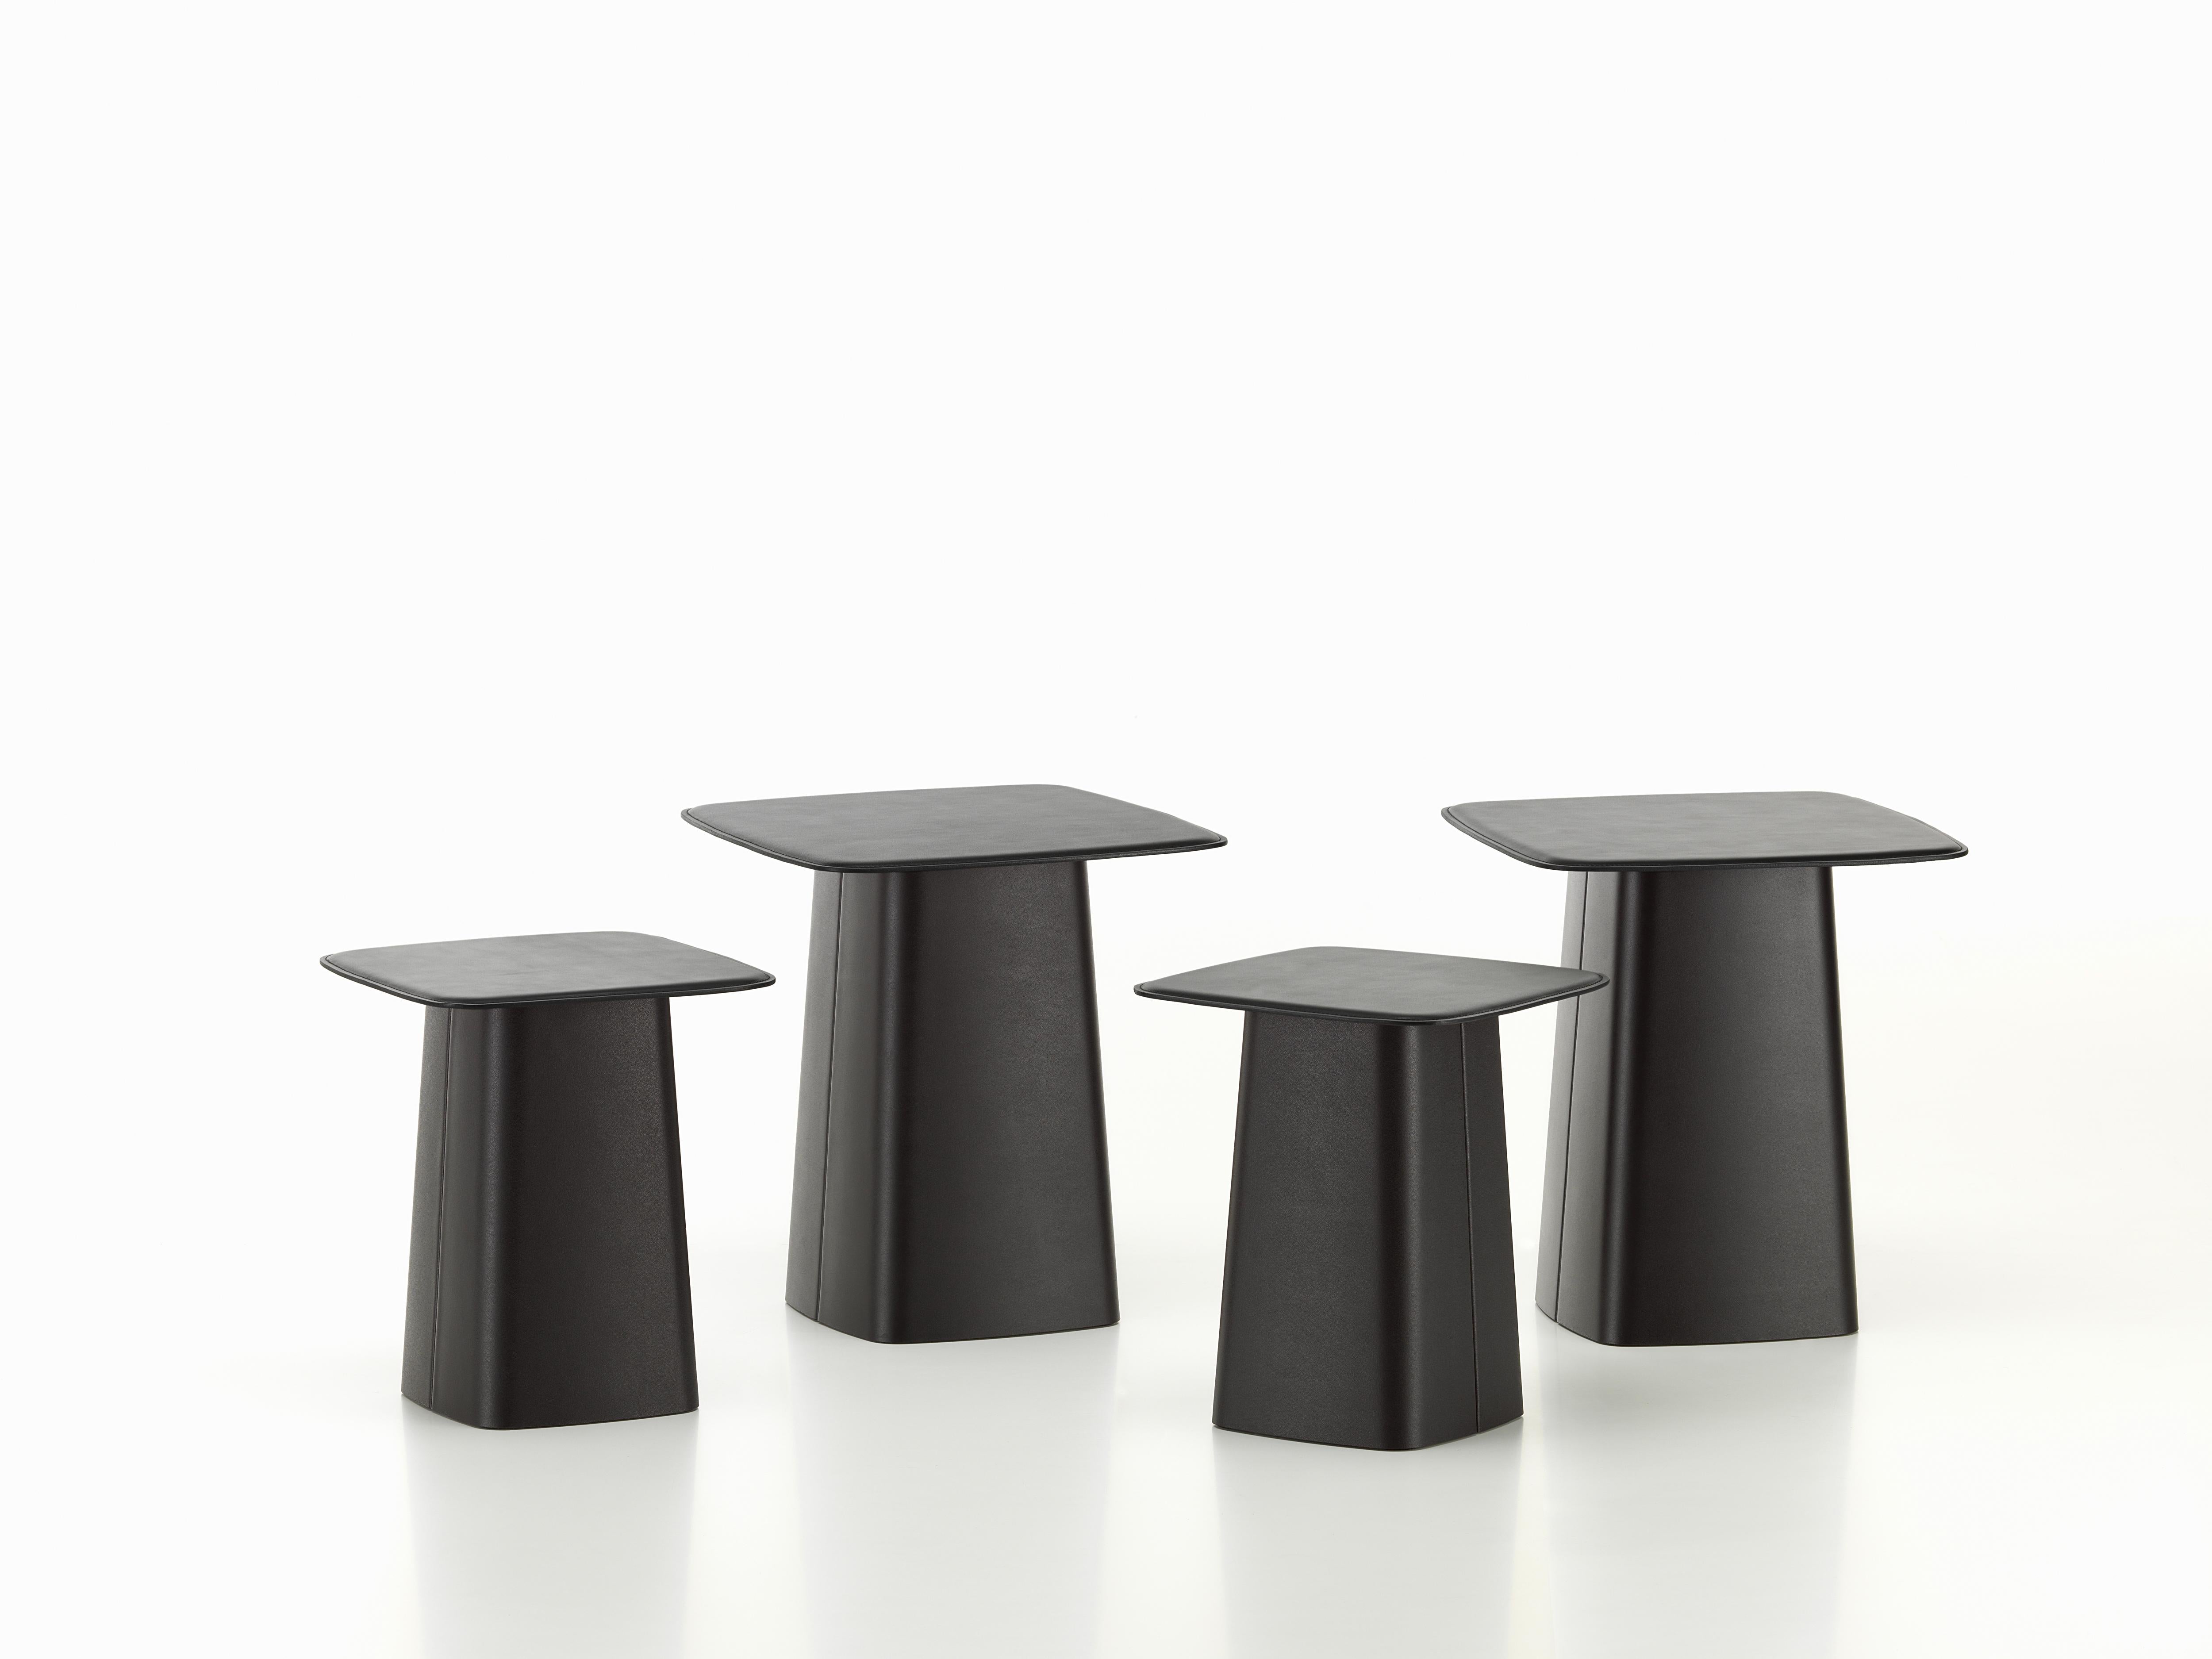 Vitra Small Leather Side Table in Nero Leather by Ronan & Erwan Bouroullec (Schweizerisch) im Angebot